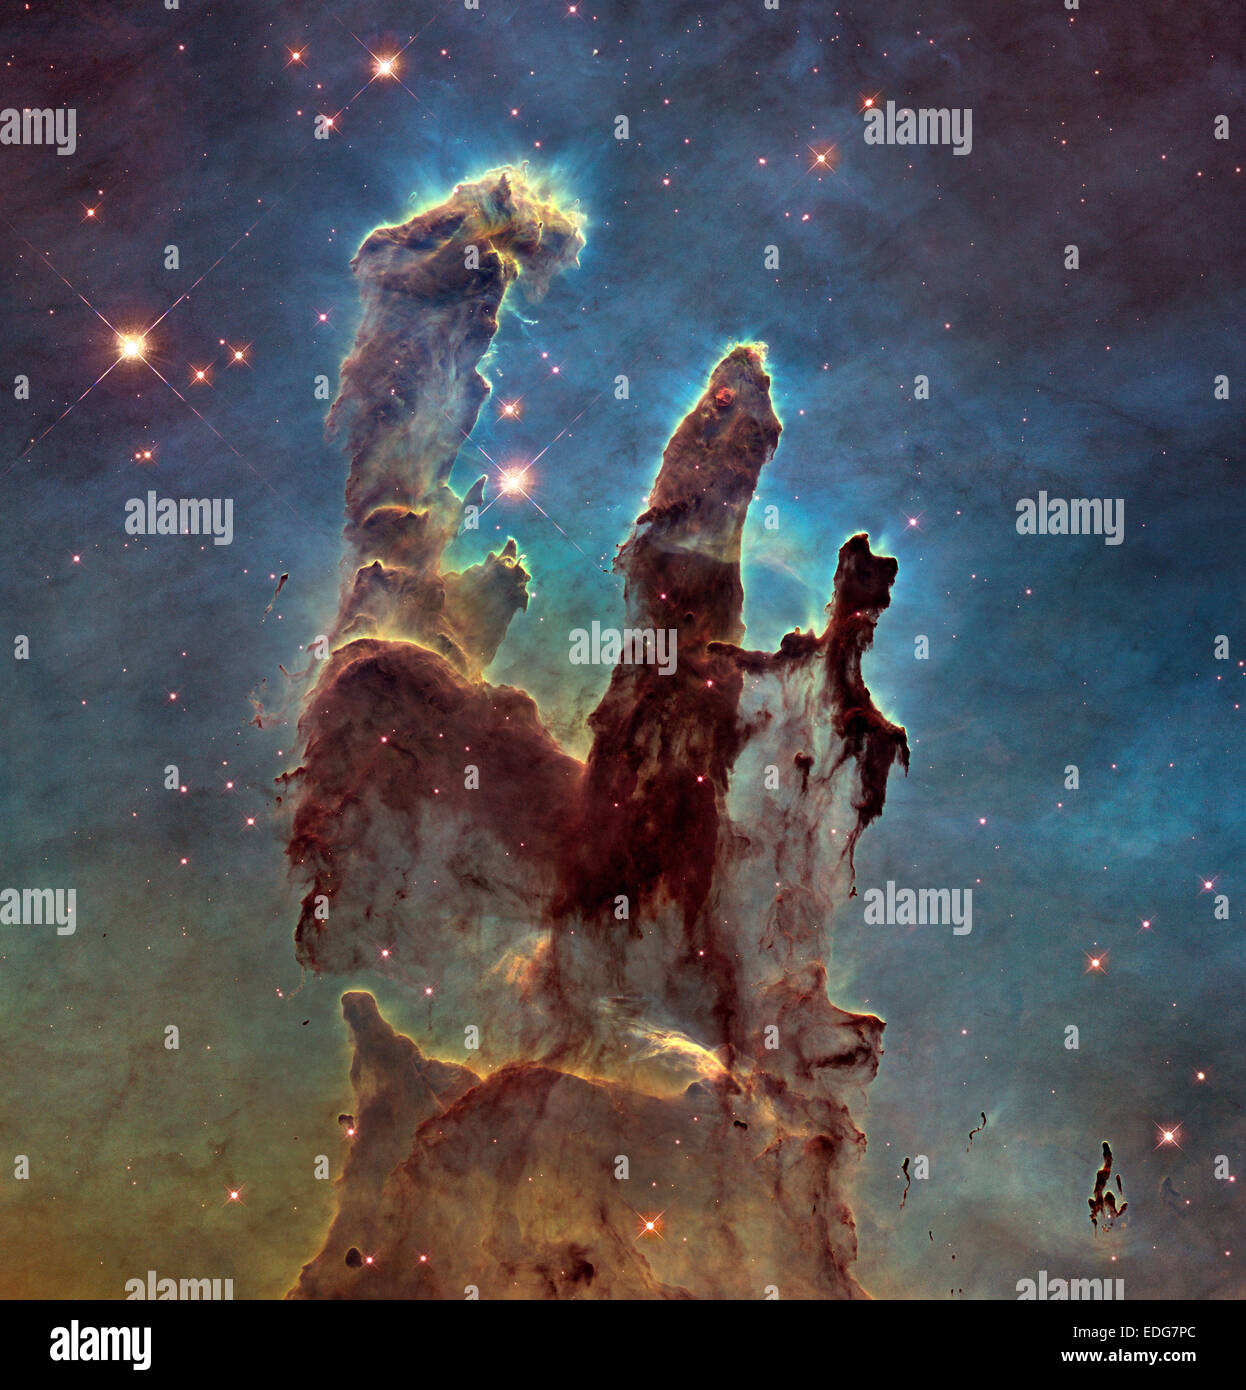 Pillars of Creation from Hubble Telescope. 5th January, 2015. NASA's Hubble Space Telescope has revisited the famous Pillars of Creation, revealing a sharper and wider view of the structures in this visible-light image. Astronomers combined several Hubble exposures to assemble the wider view. The towering pillars are about 5 light-years tall. The dark, finger-like feature at bottom right may be a smaller version of the giant pillars. The new image was taken with Hubble's versatile and sharp-eyed Wide Field Camera Three January 5, 2015. Credit:  Planetpix/Alamy Live News Stock Photo